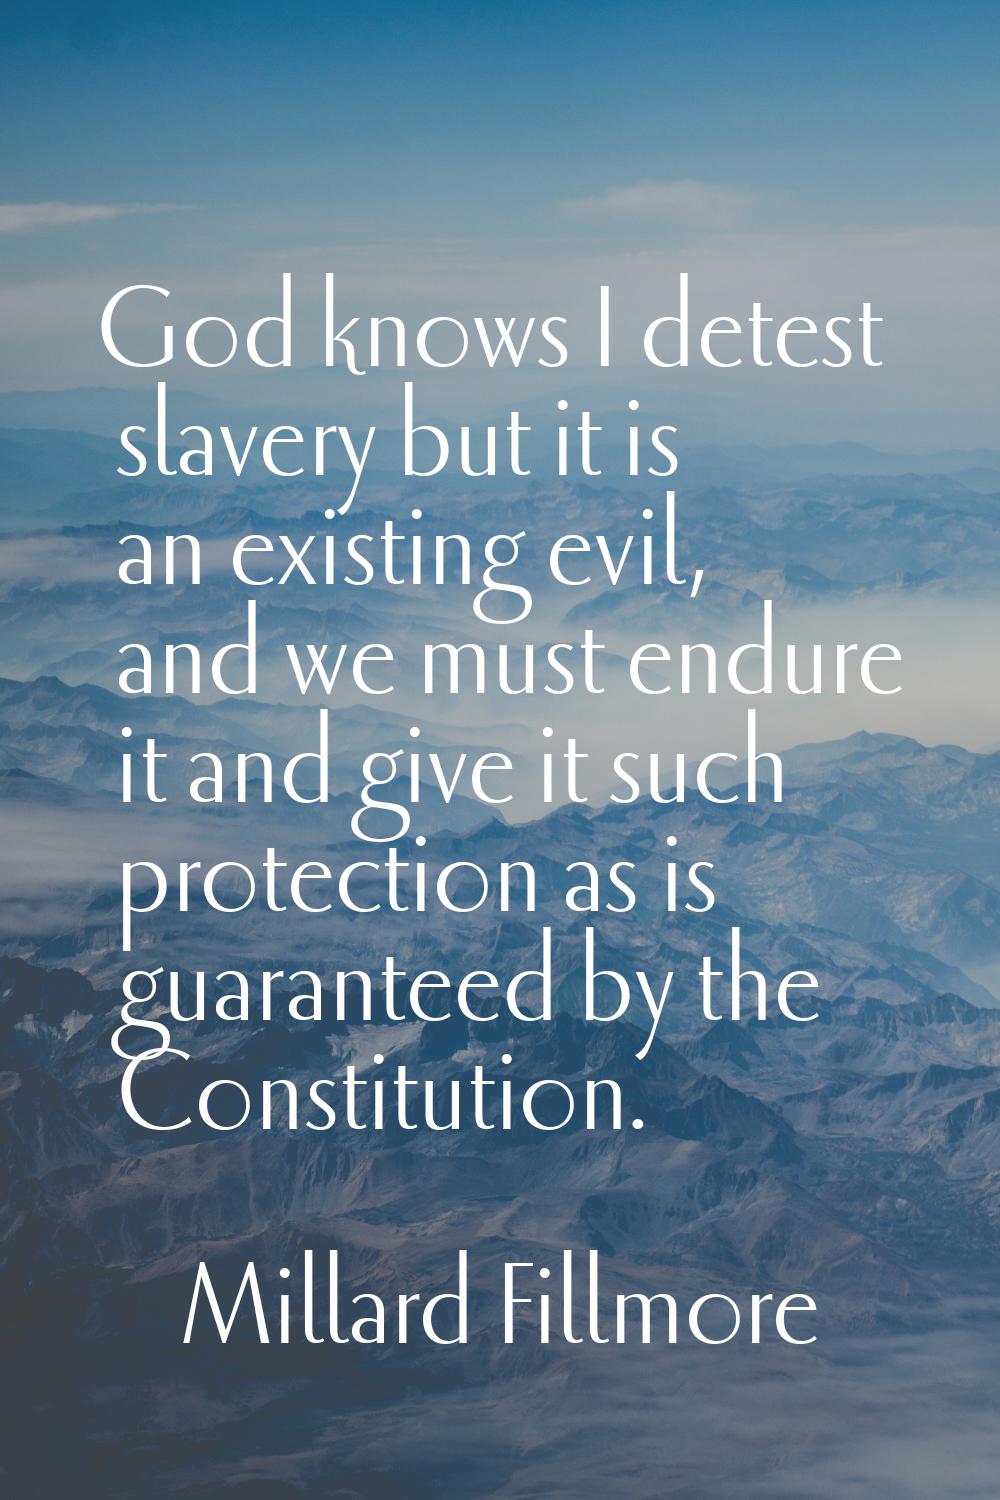 God knows I detest slavery but it is an existing evil, and we must endure it and give it such prote